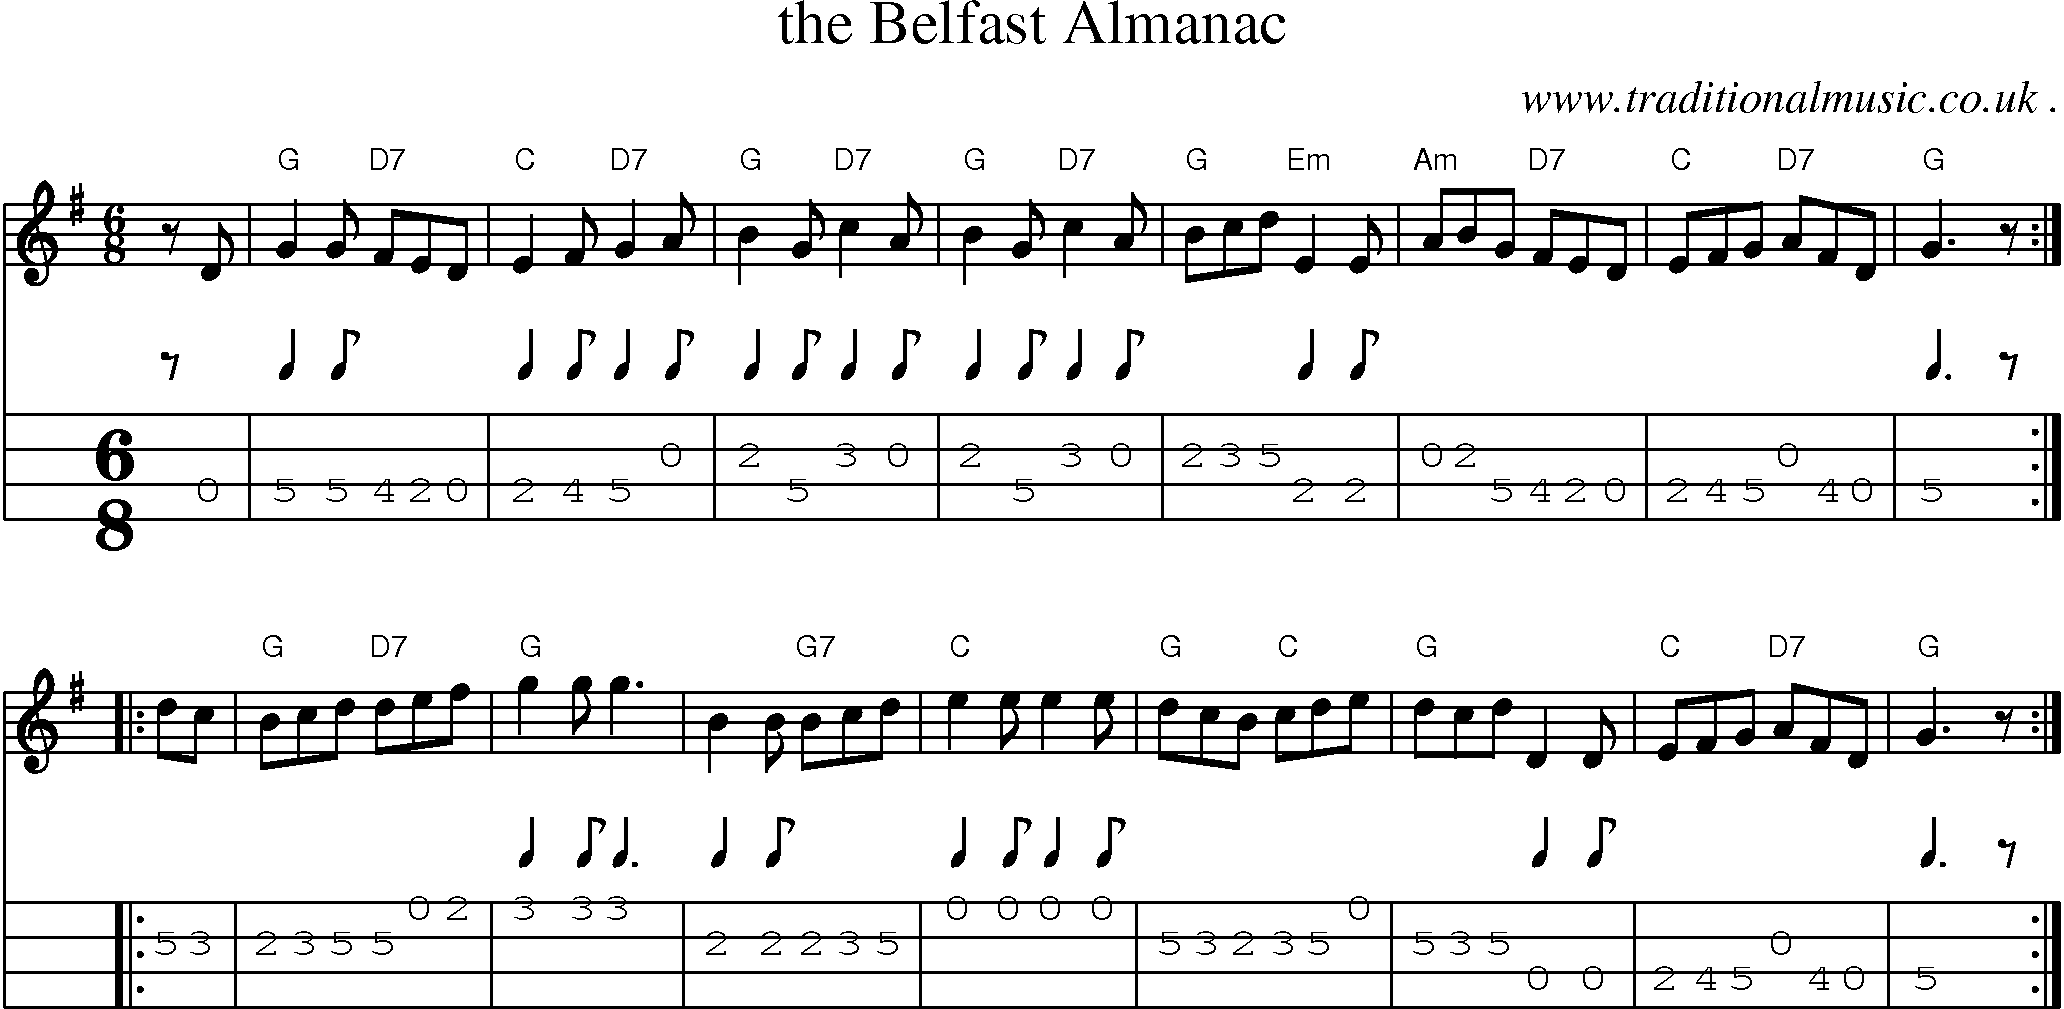 Sheet-music  score, Chords and Mandolin Tabs for The Belfast Almanac